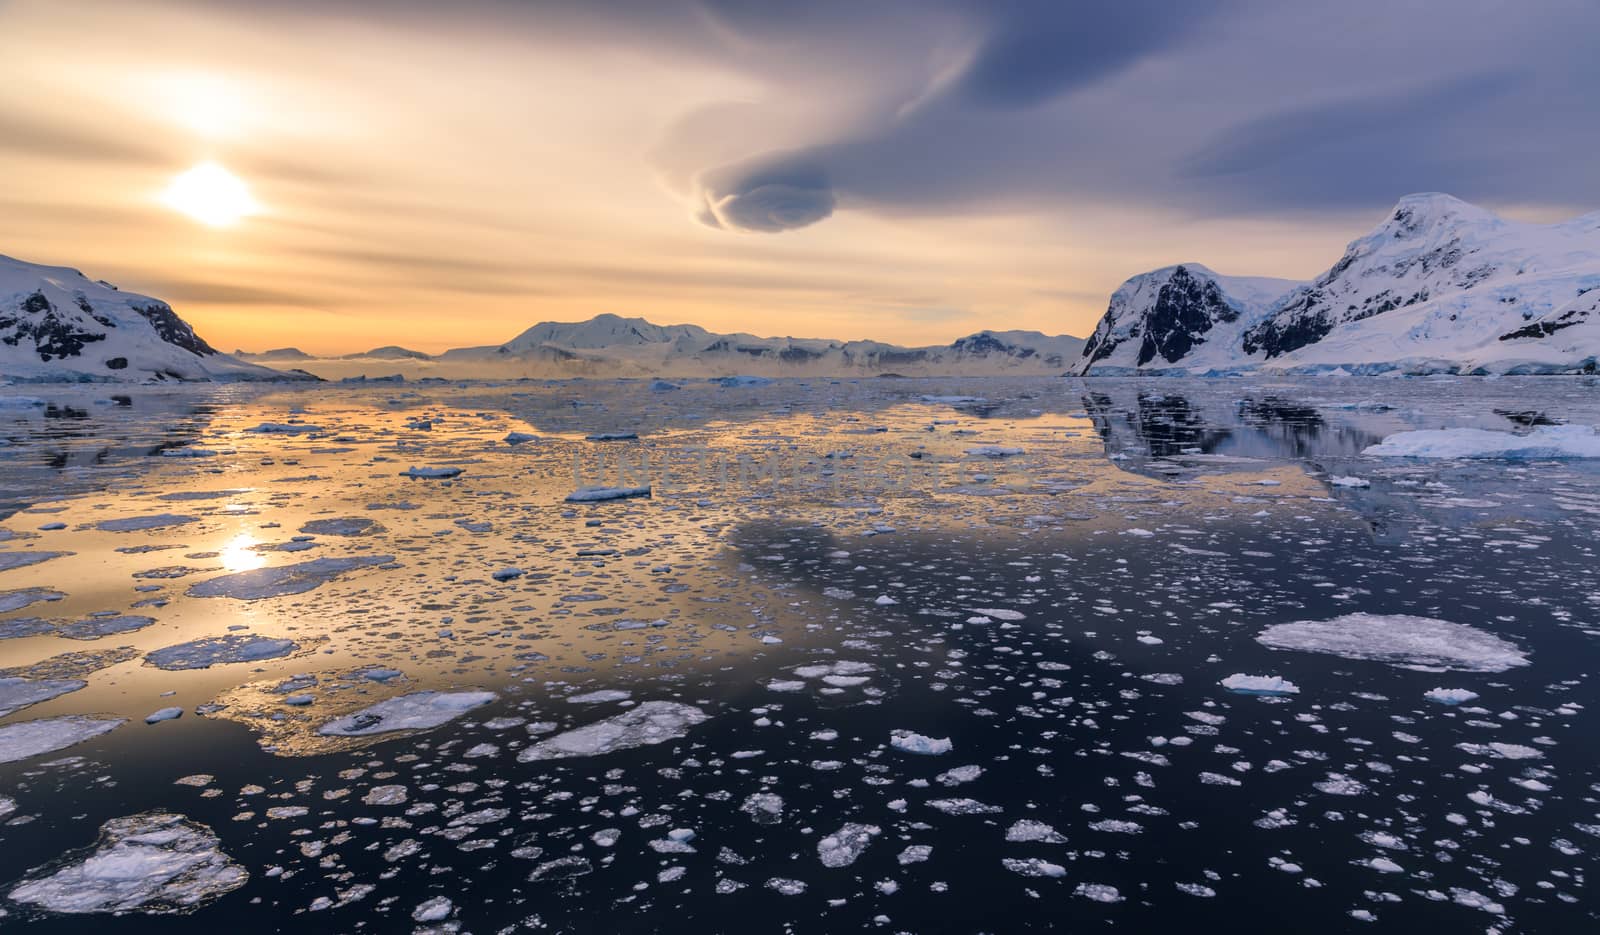 Icebergs and sunset reflecting in water at Lemaire Strait, Antarctica